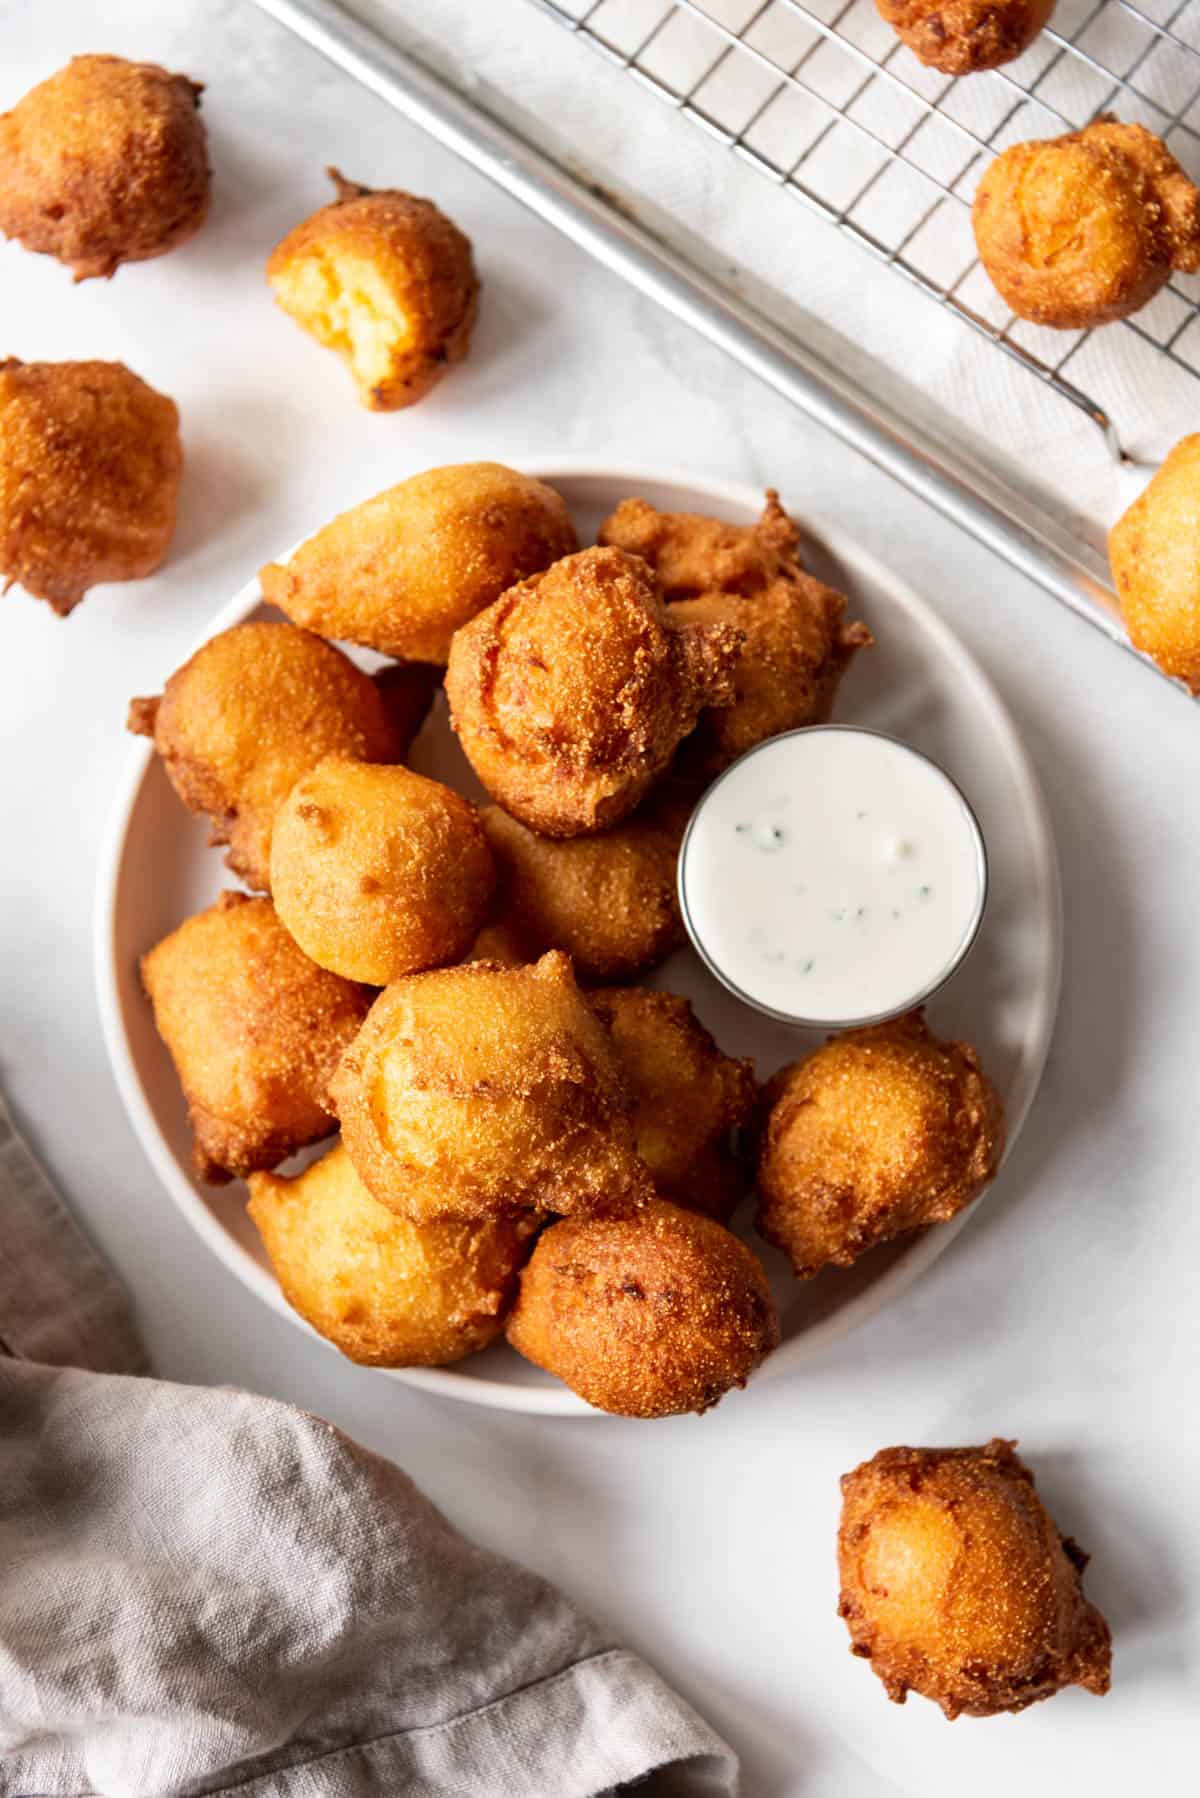 A plate of golden brown hush puppies with ranch dipping sauce.